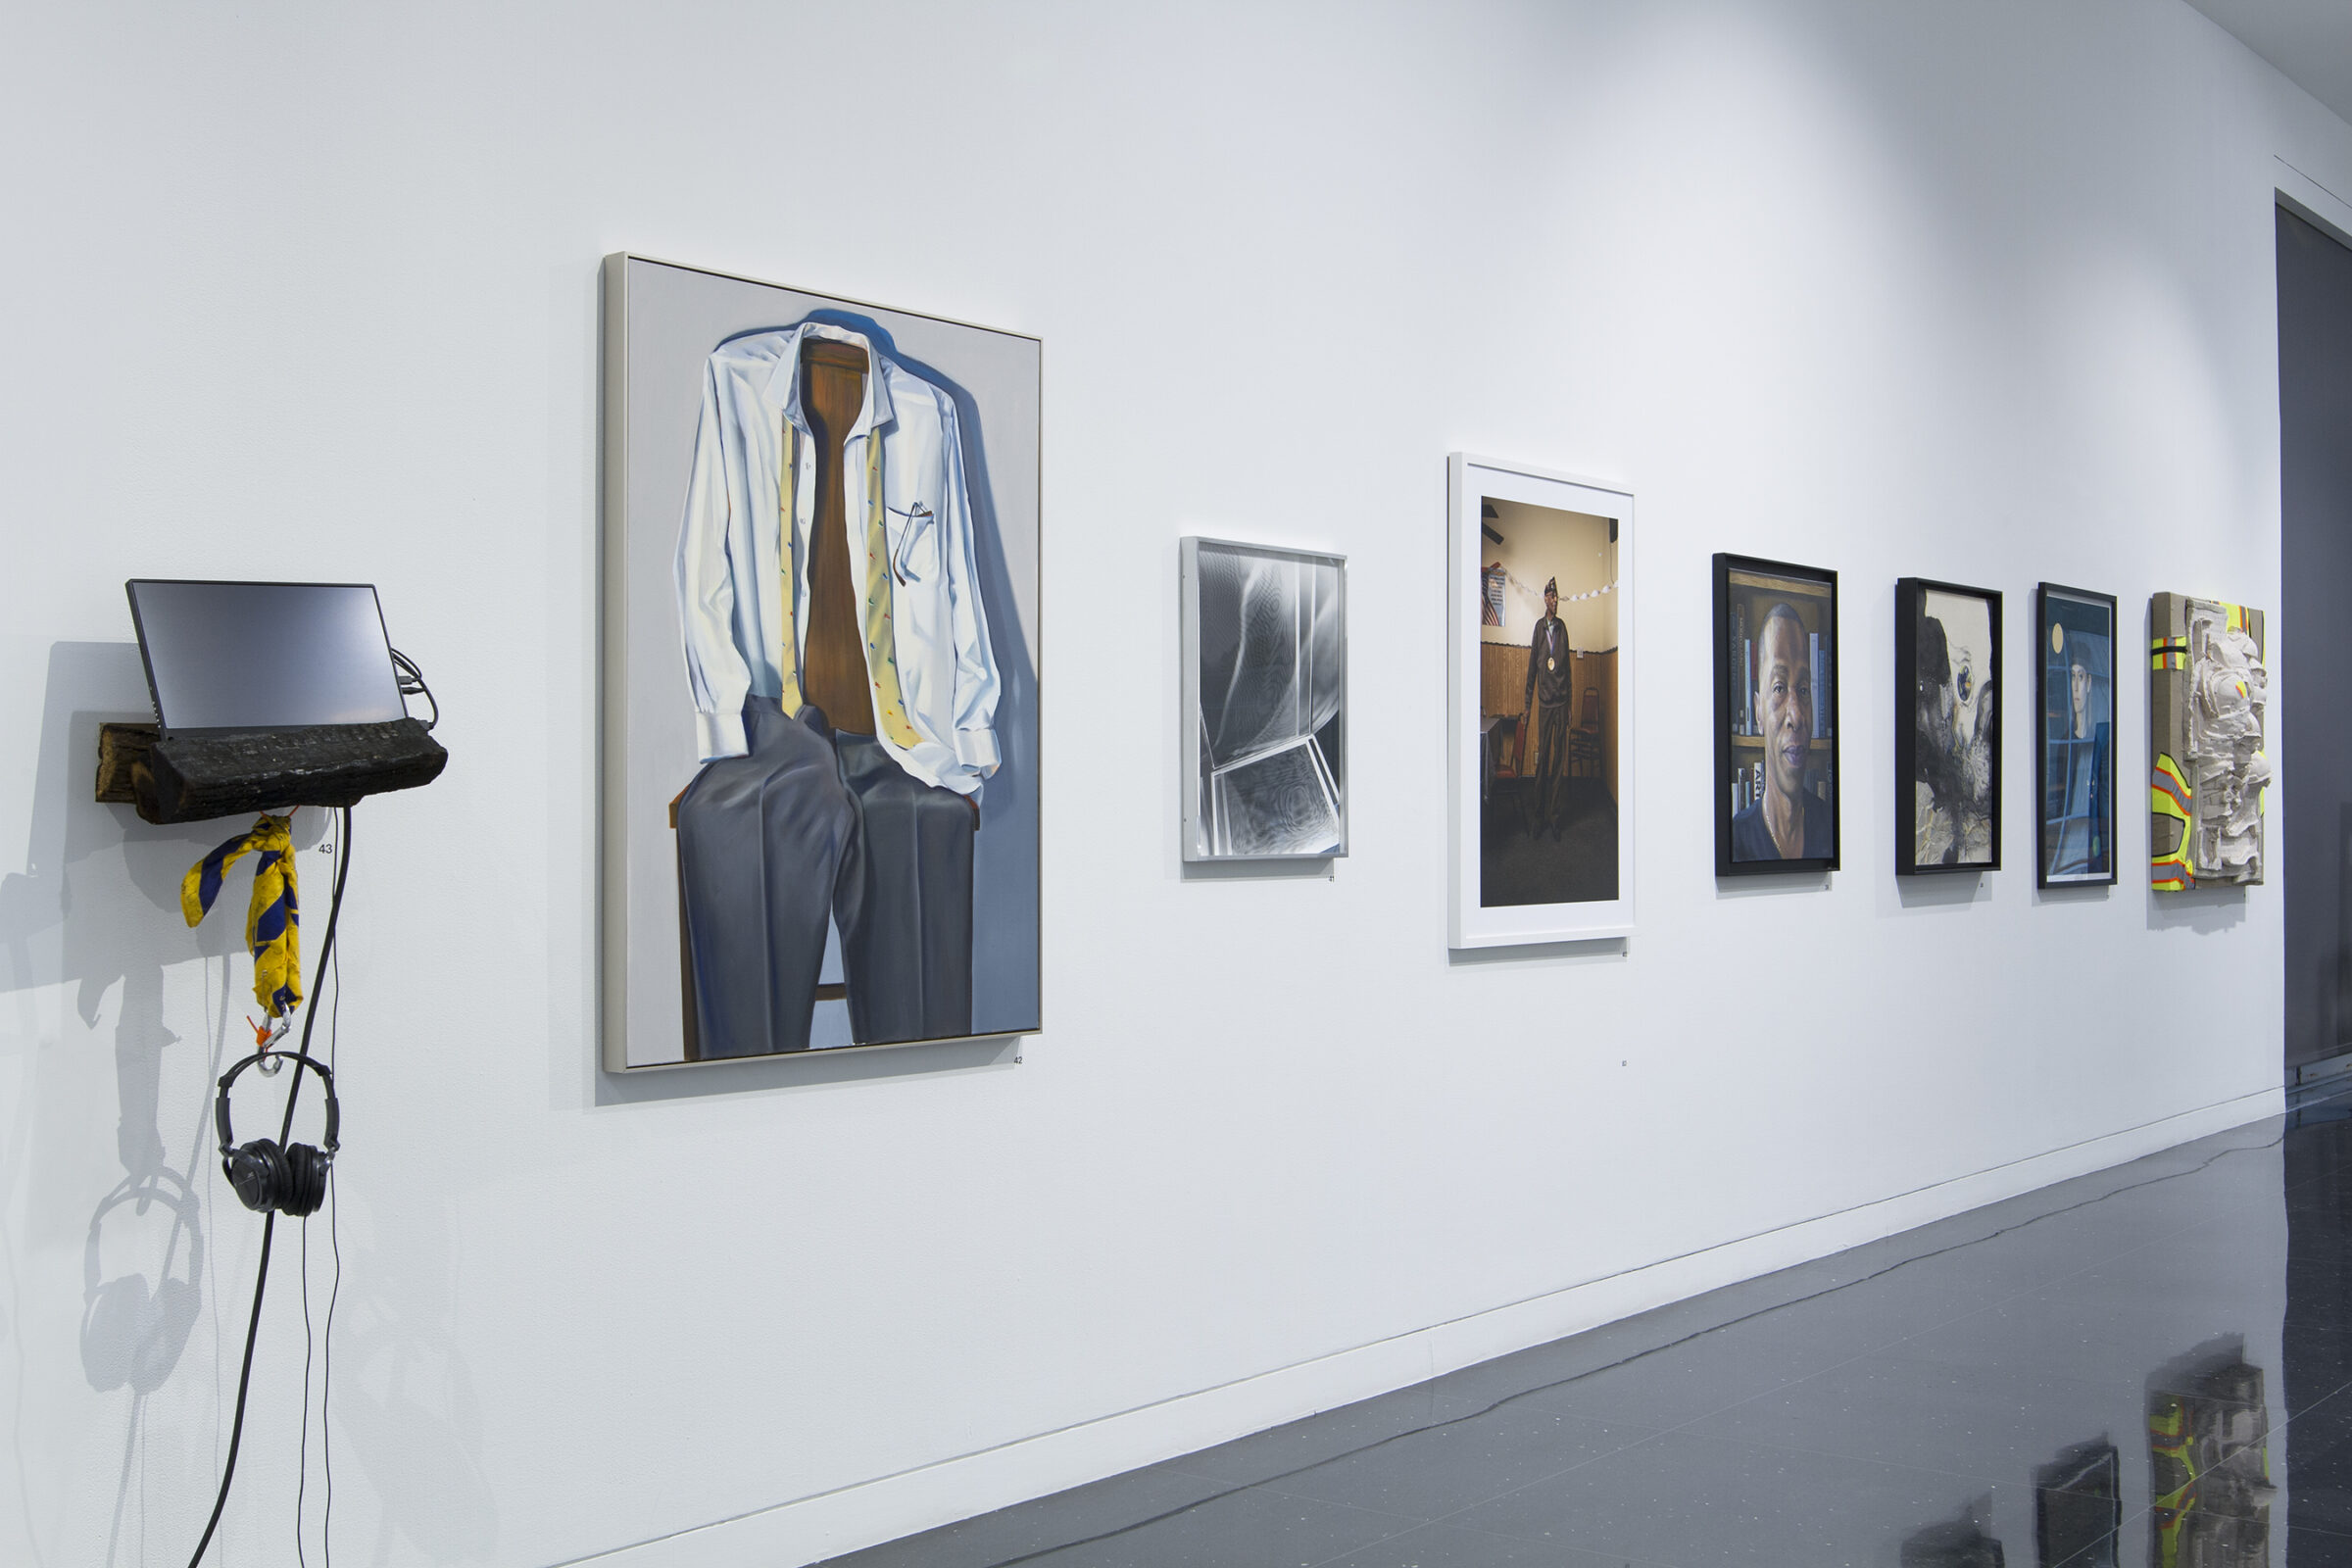 A white walled gallery space displaying a row of framed artworks. On the far left side is a makeshift audio and video installation next to a large painting of a men's suit draped over a chair.